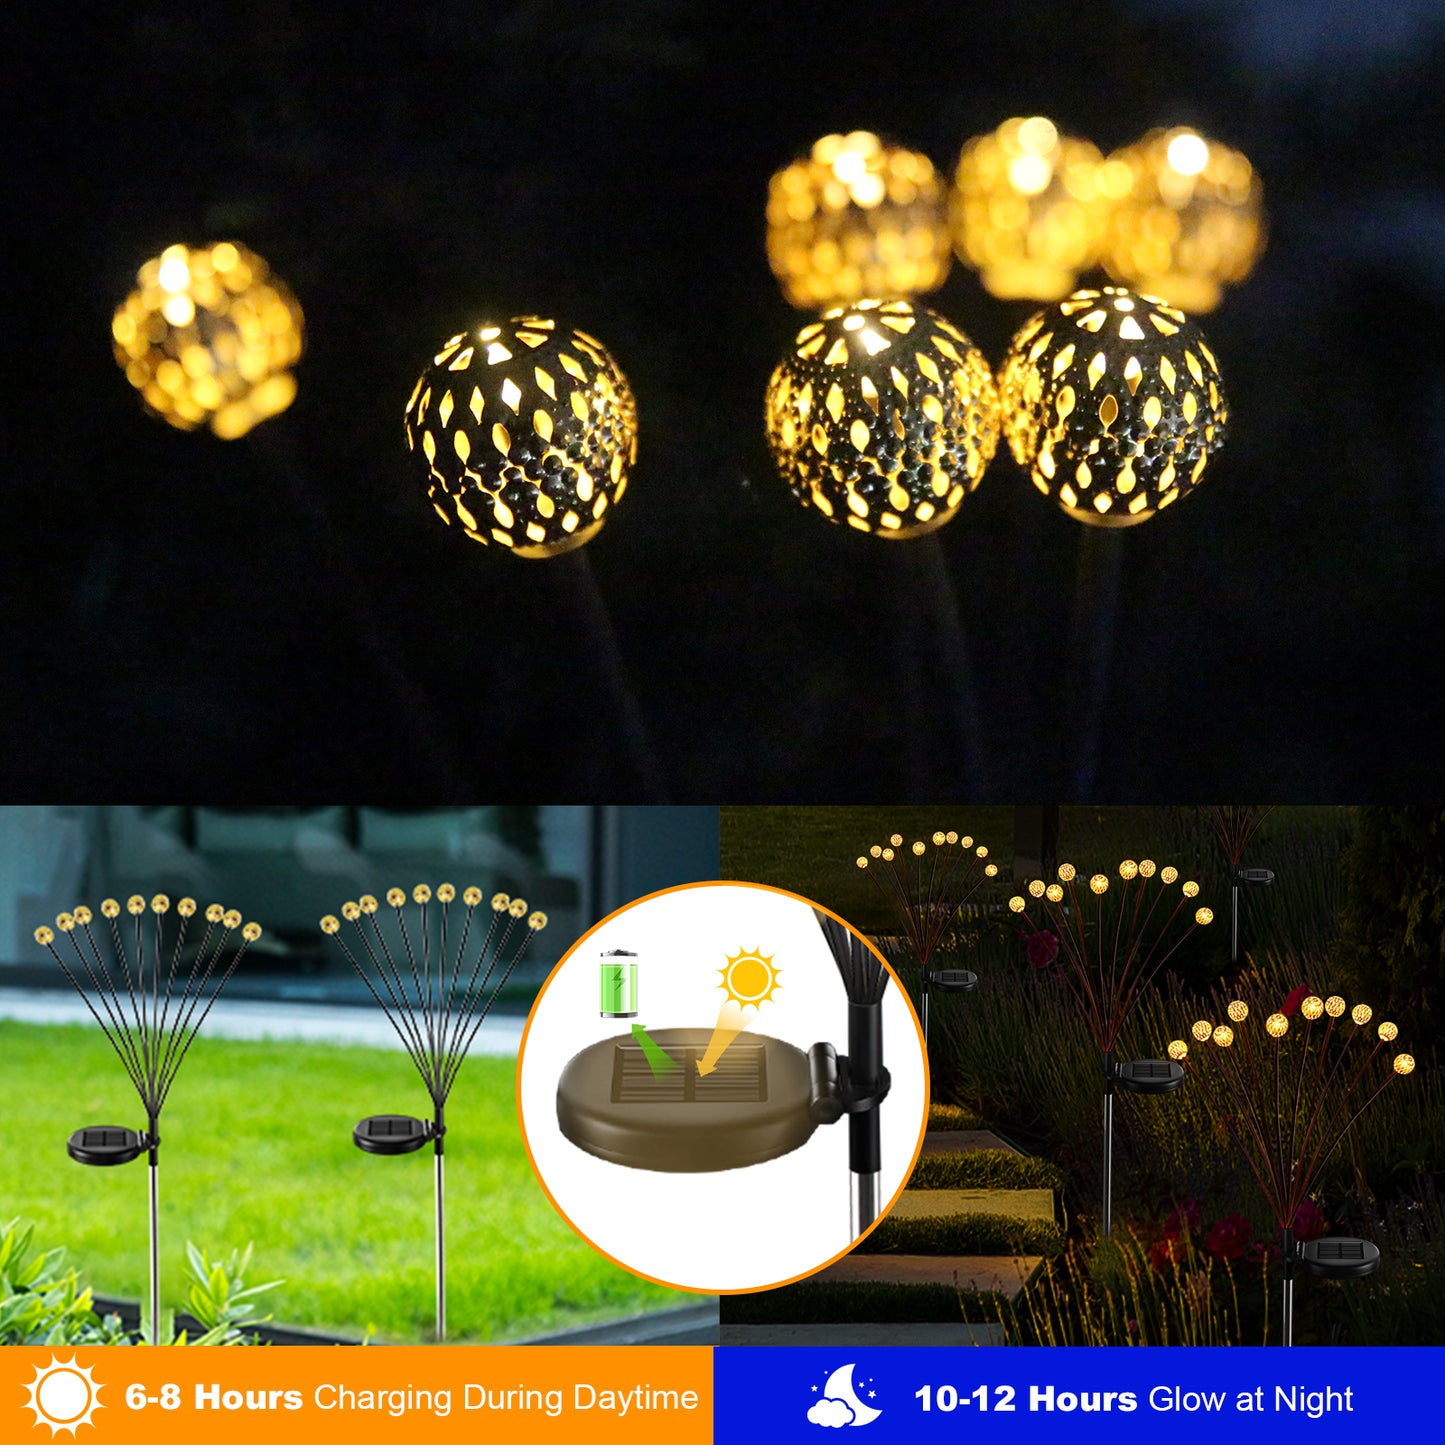 Solarera Solar Swinging Moroccan Lights, New Upgraded Waterproof 2 Pack 8 Modes Solar Powered Garden Lights for Patio Pathway Party Decoration